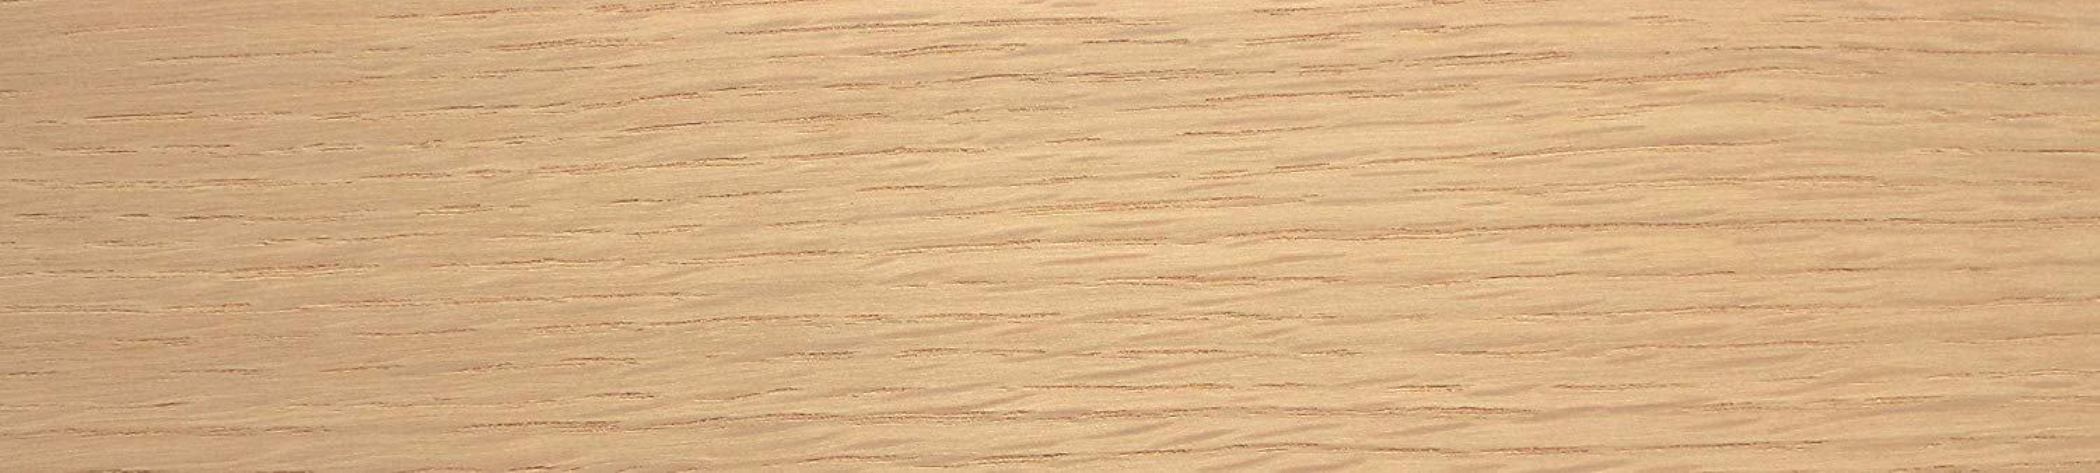 American White Oak Pre-glued Edging / Lipping 50mm x 1mm Thick Wood Edging x 50 Metres **NOT IRON ON**